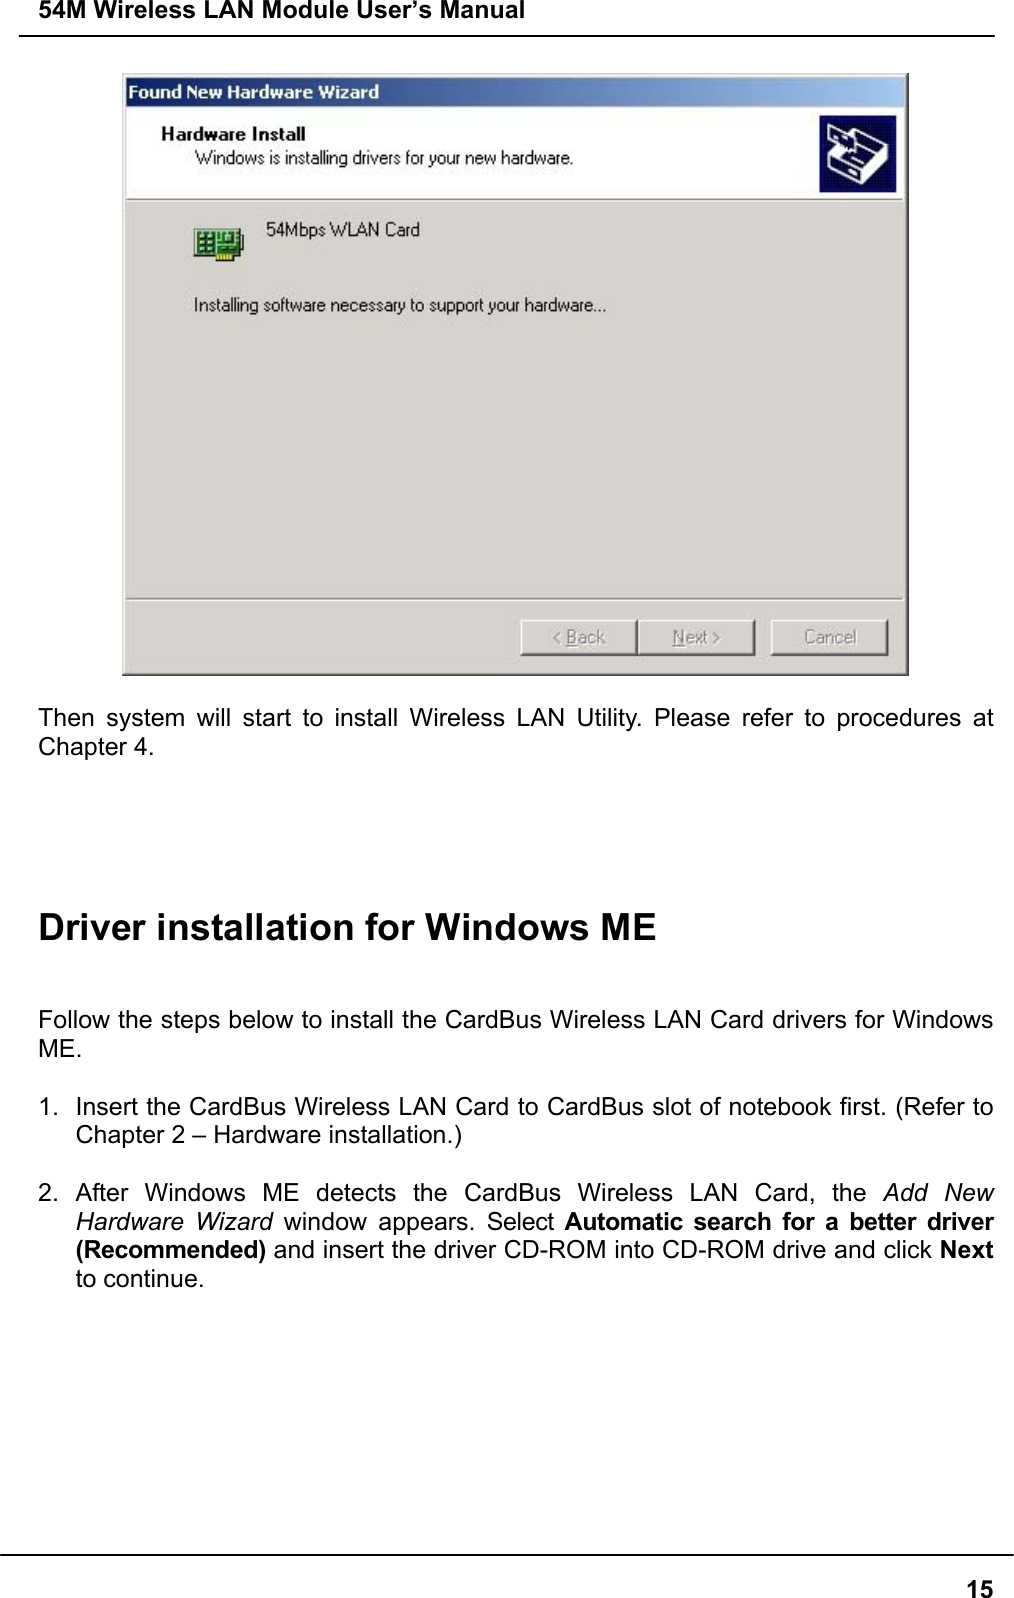 54M Wireless LAN Module User’s Manual15Then system will start to install Wireless LAN Utility. Please refer to procedures atChapter 4.Driver installation for Windows MEFollow the steps below to install the CardBus Wireless LAN Card drivers for WindowsME.1.  Insert the CardBus Wireless LAN Card to CardBus slot of notebook first. (Refer toChapter 2 – Hardware installation.)2. After Windows ME detects the CardBus Wireless LAN Card, the Add NewHardware Wizard window appears. Select Automatic search for a better driver(Recommended) and insert the driver CD-ROM into CD-ROM drive and click Nextto continue.